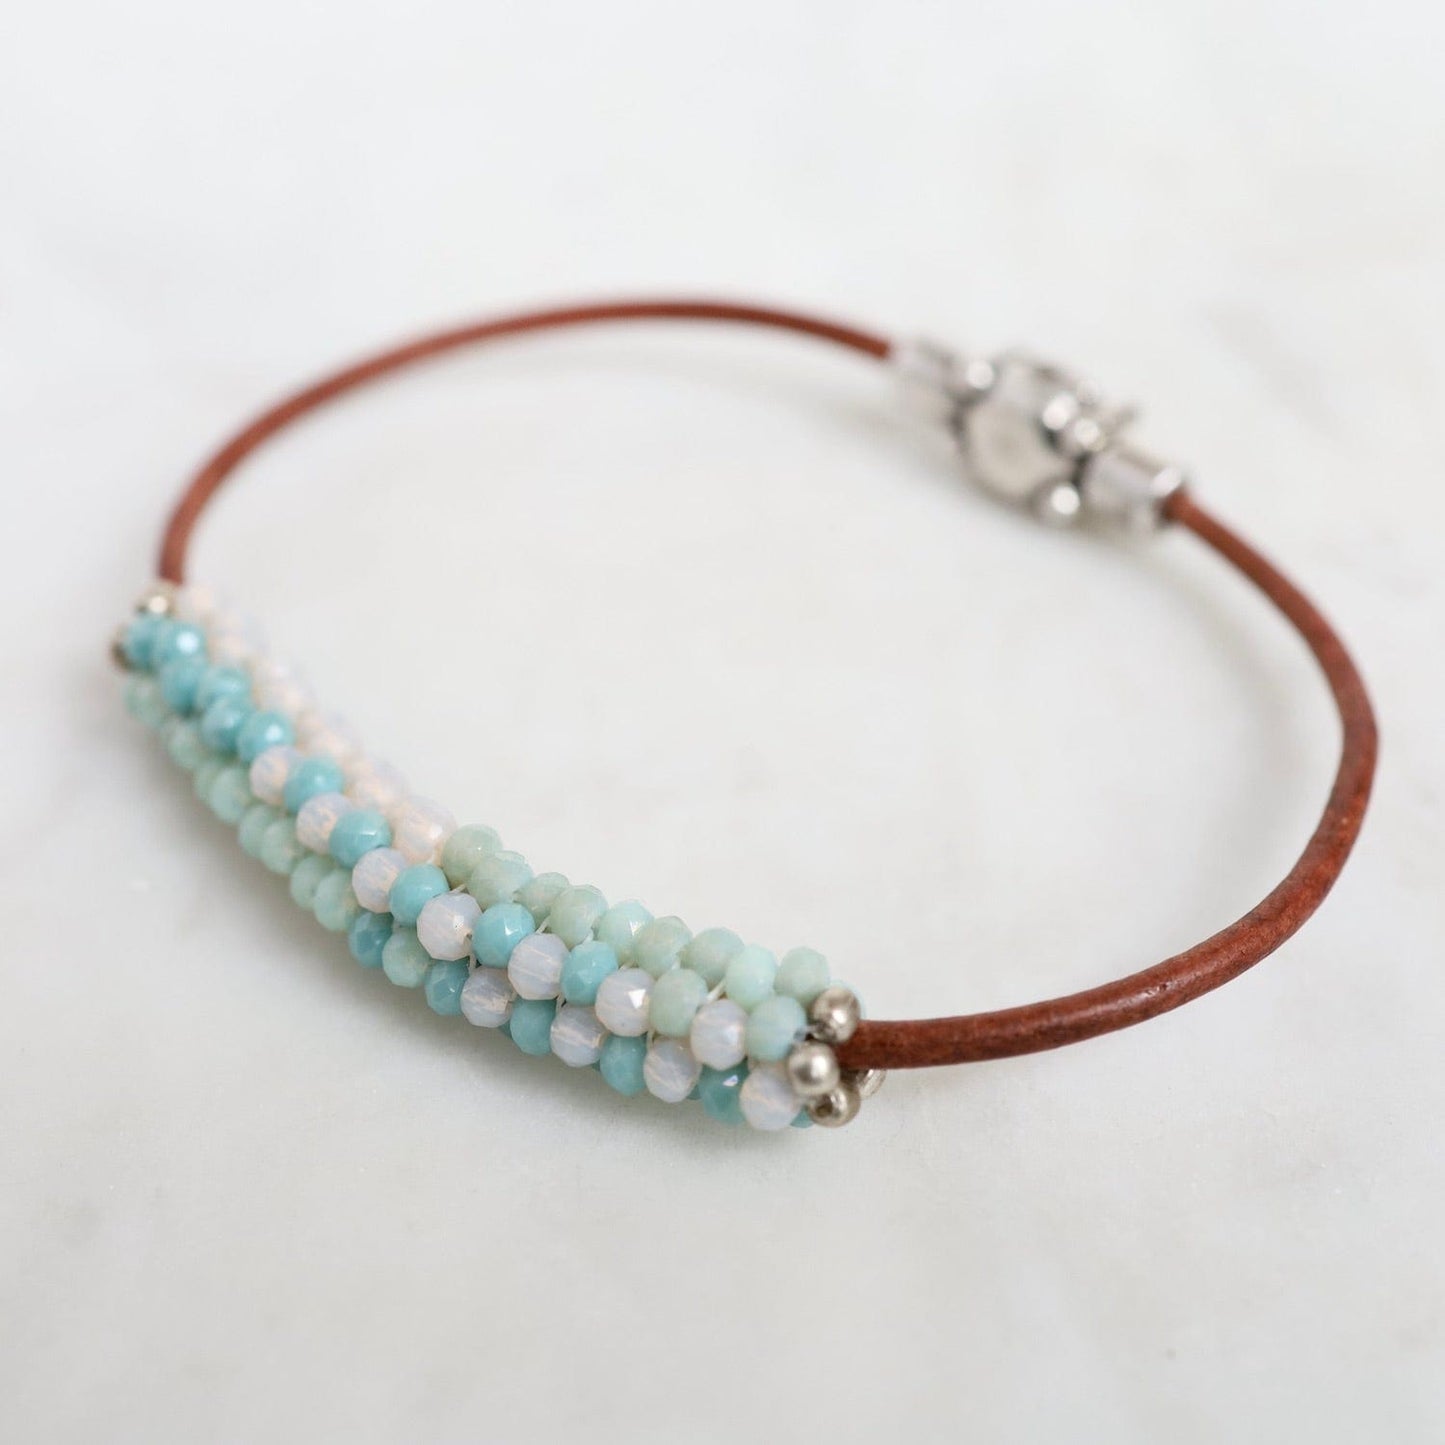 BRC-JM Hand Stitched Mixed Crystals in Aqua, Mint & Pale Pink on Brown Leather Bracelet